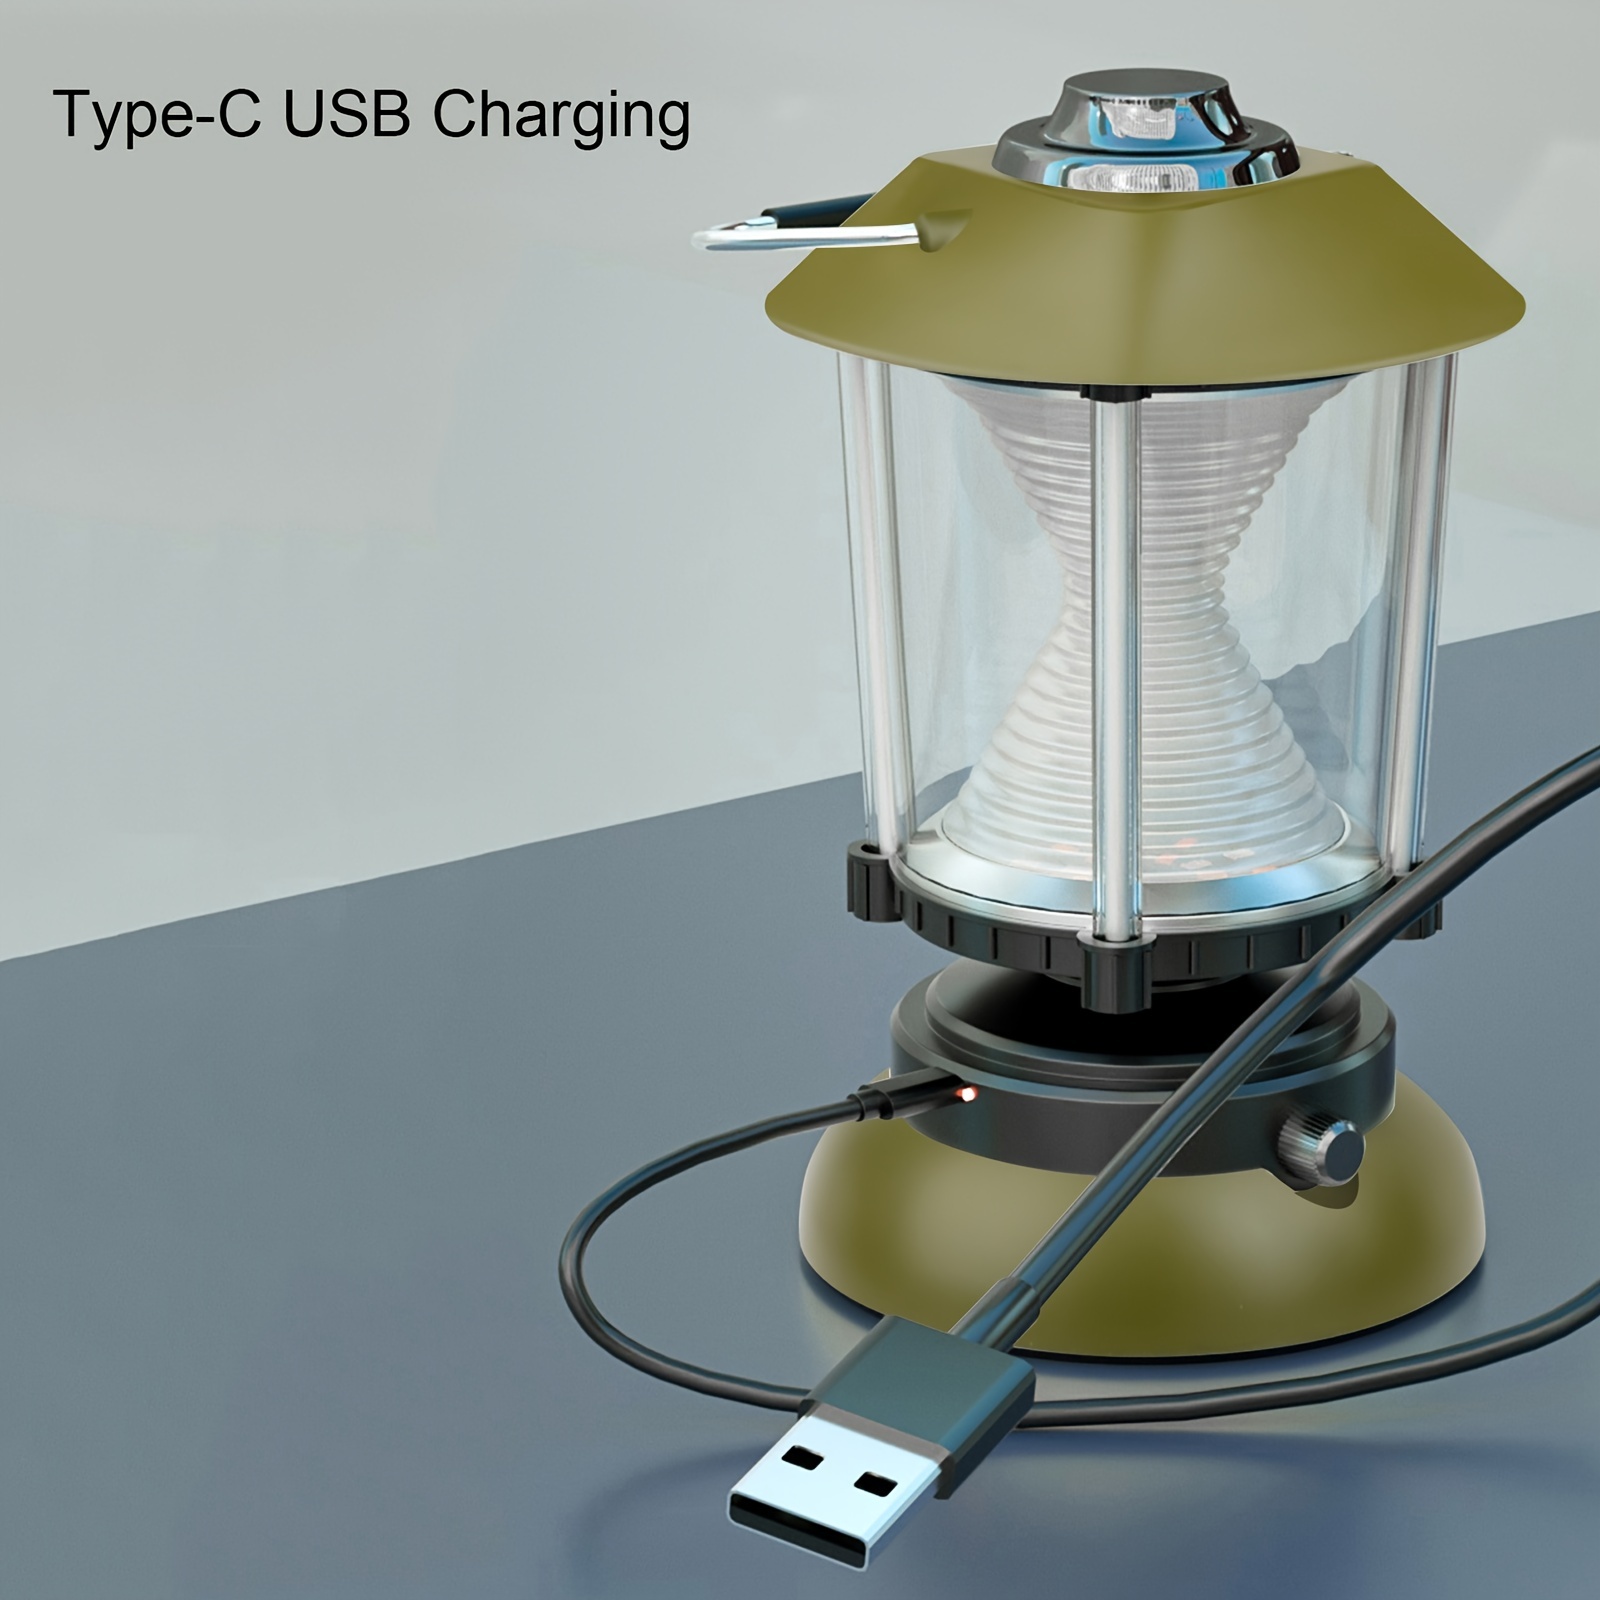 Portable Lanterns USB Rechargeable Lamp LED Camping Lantern Outdoor  Waterproof Battery Lamp ABS Flashlight Light Bulb